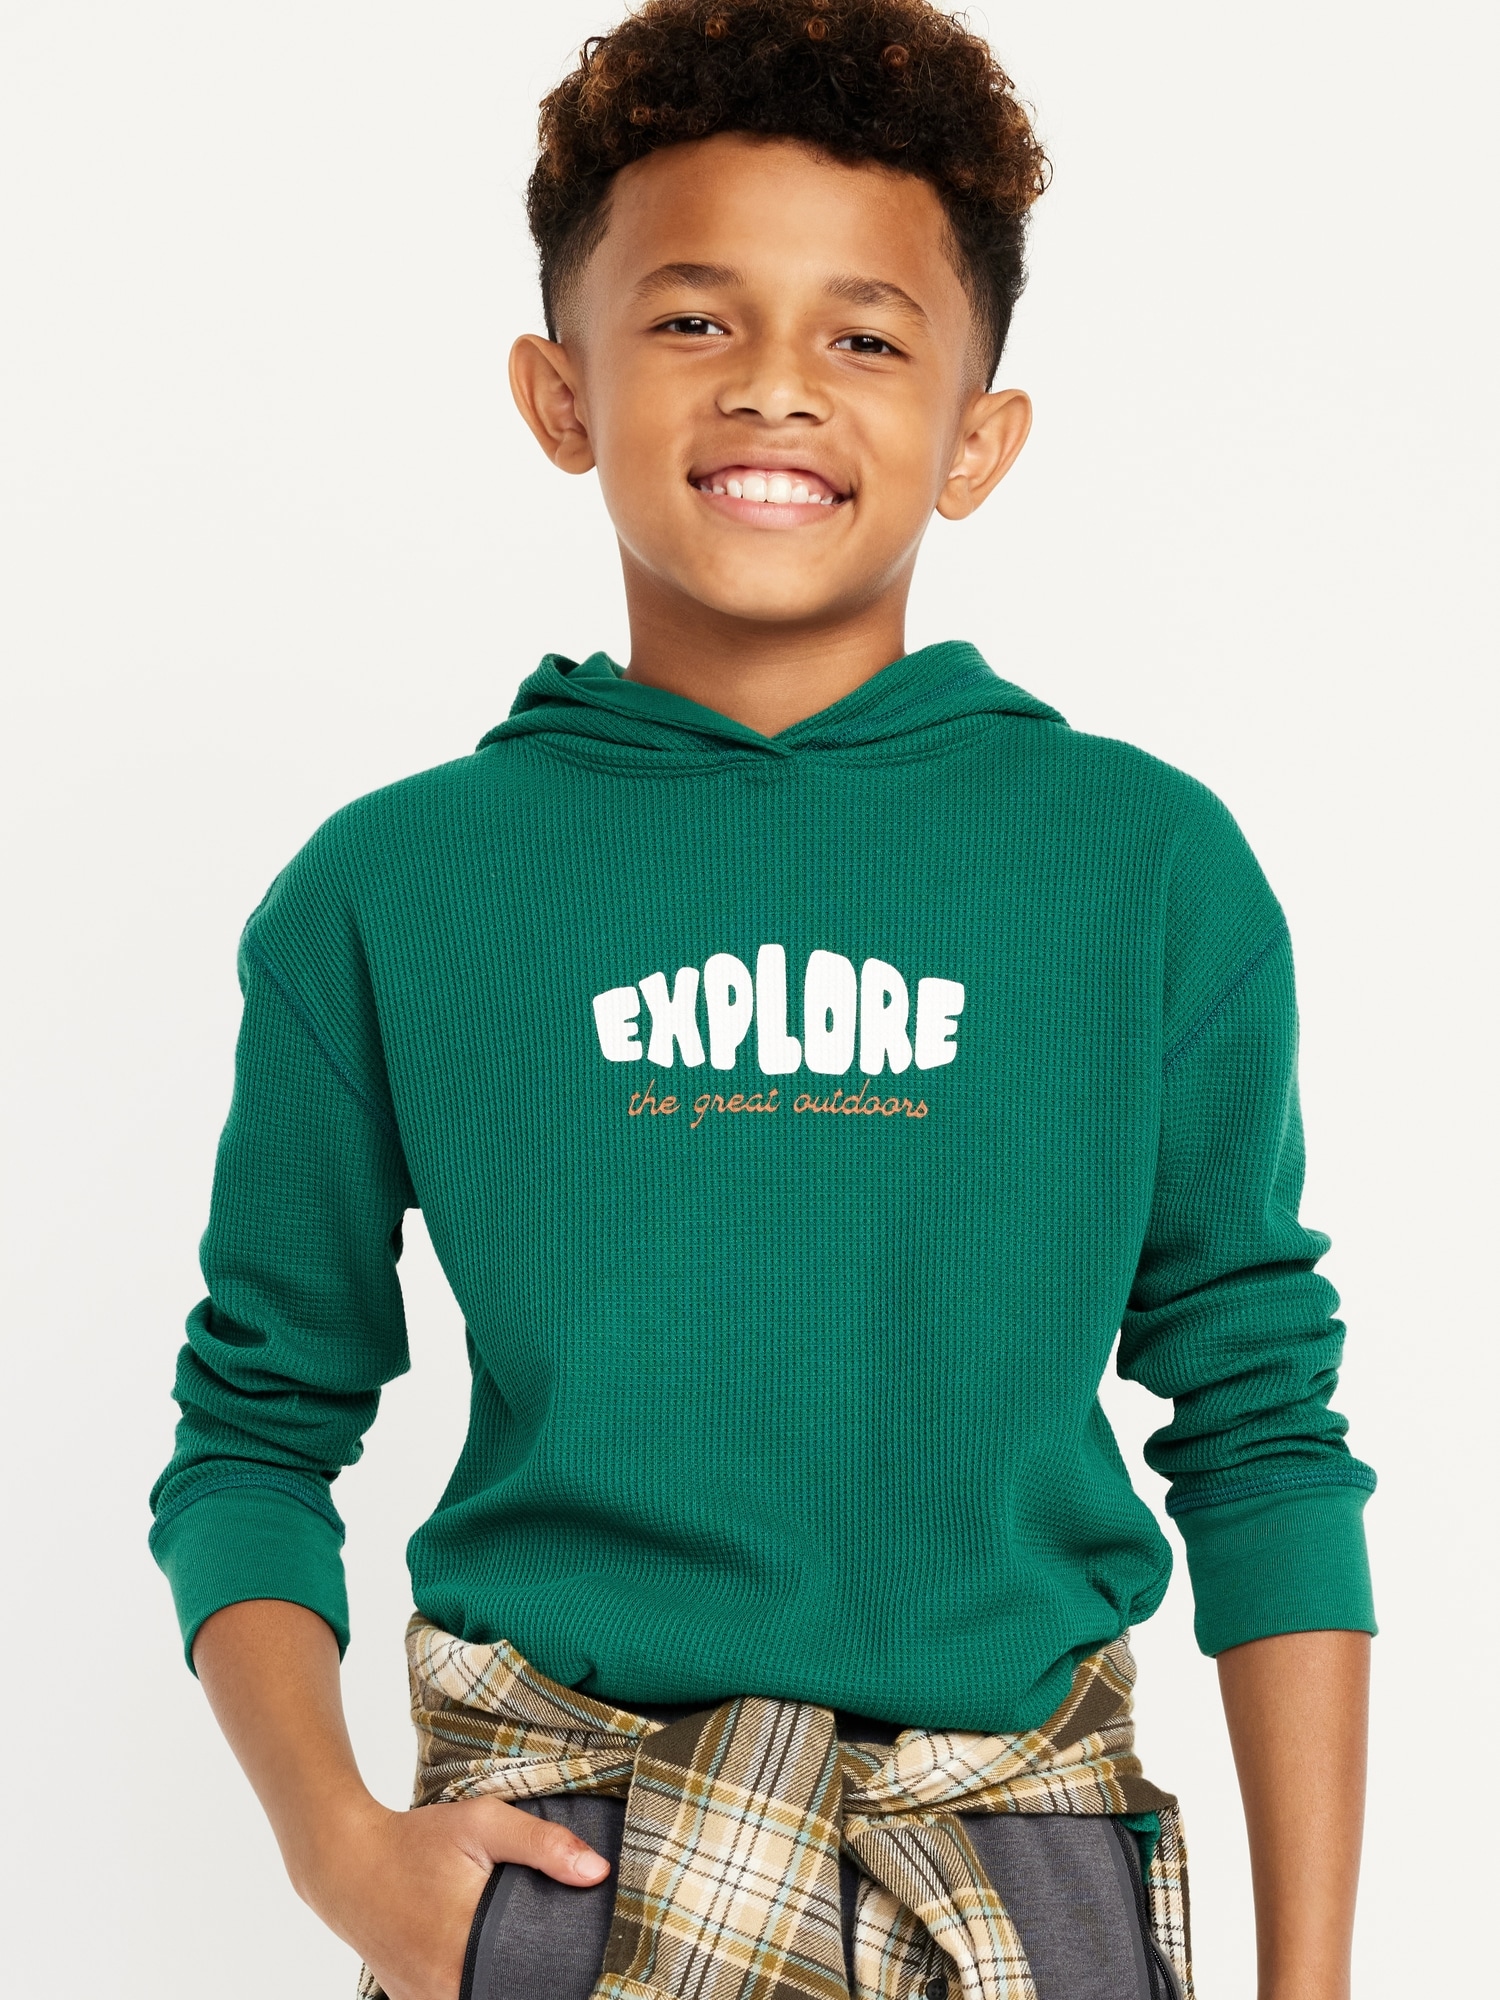 Long-Sleeve Thermal-Knit Graphic Hoodie T-Shirt for Boys